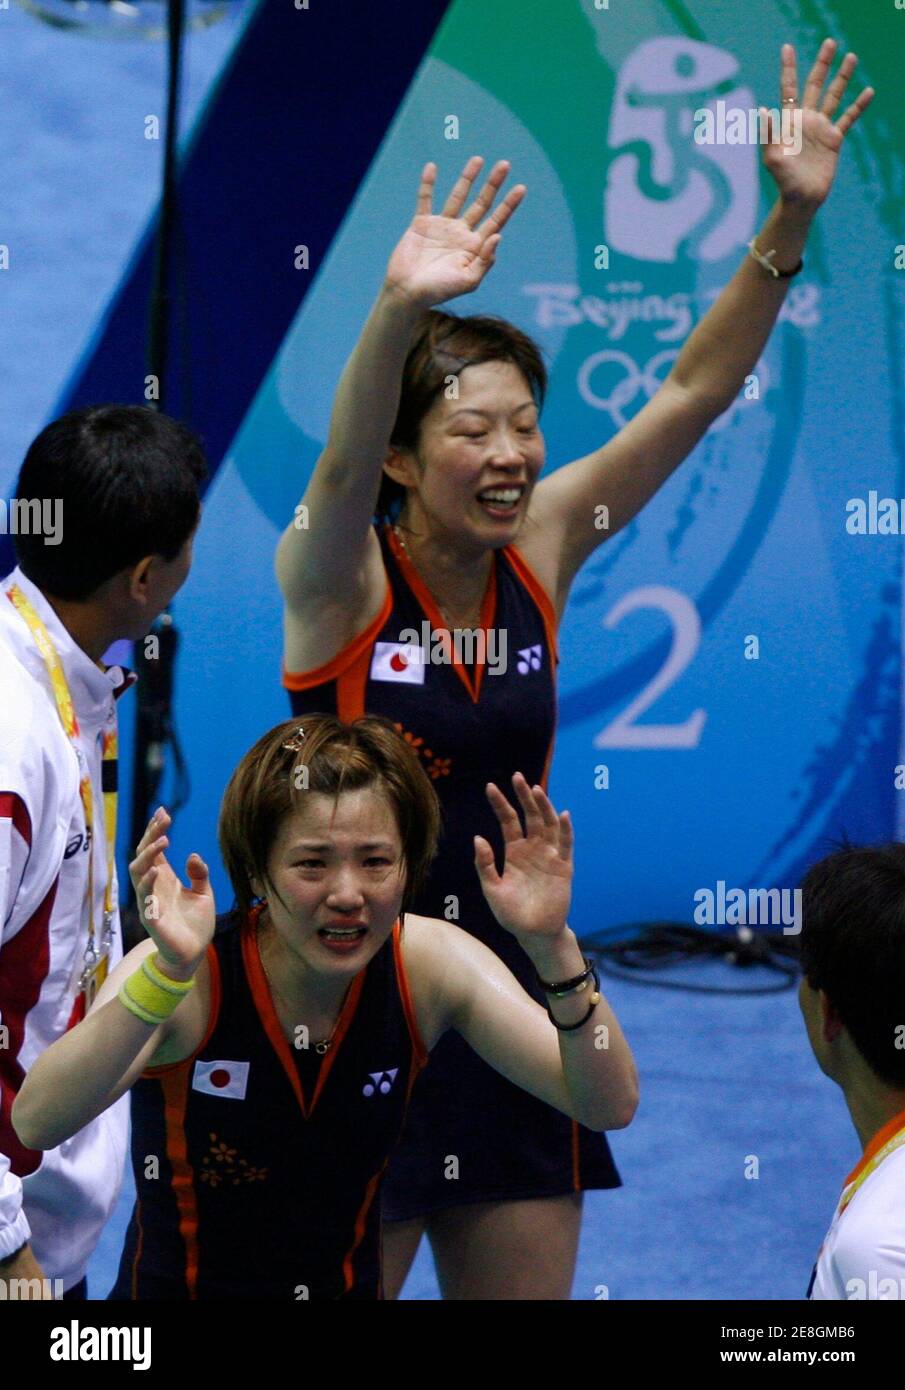 Miyuki Maeda (front) of Japan and her teammate Satoko Suetsuna wave after beating Yang Wei and Zhang Jiewen of China in their women's doubles quarter-final badminton match at the Beijing 2008 Olympic Games, August 11, 2008.     REUTERS/Beawiharta (CHINA) Stock Photo